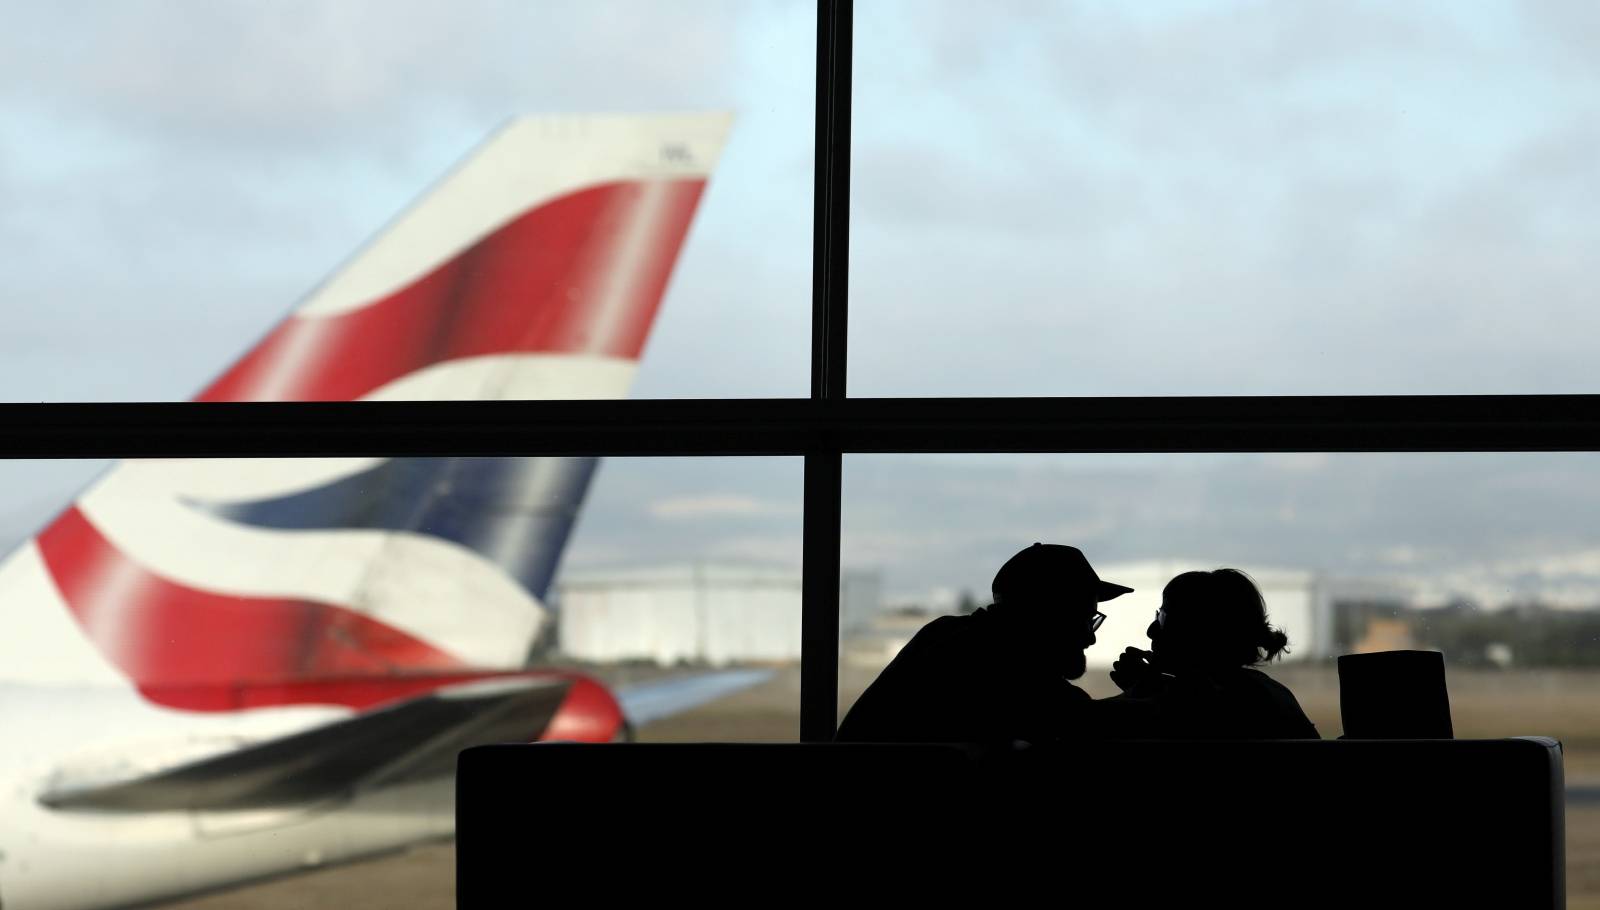 FILE PHOTO: A British Airways Boeing 747 passenger aircraft prepares to take off as passengers wait to board a flight in Cape Town International airport in Cape Town